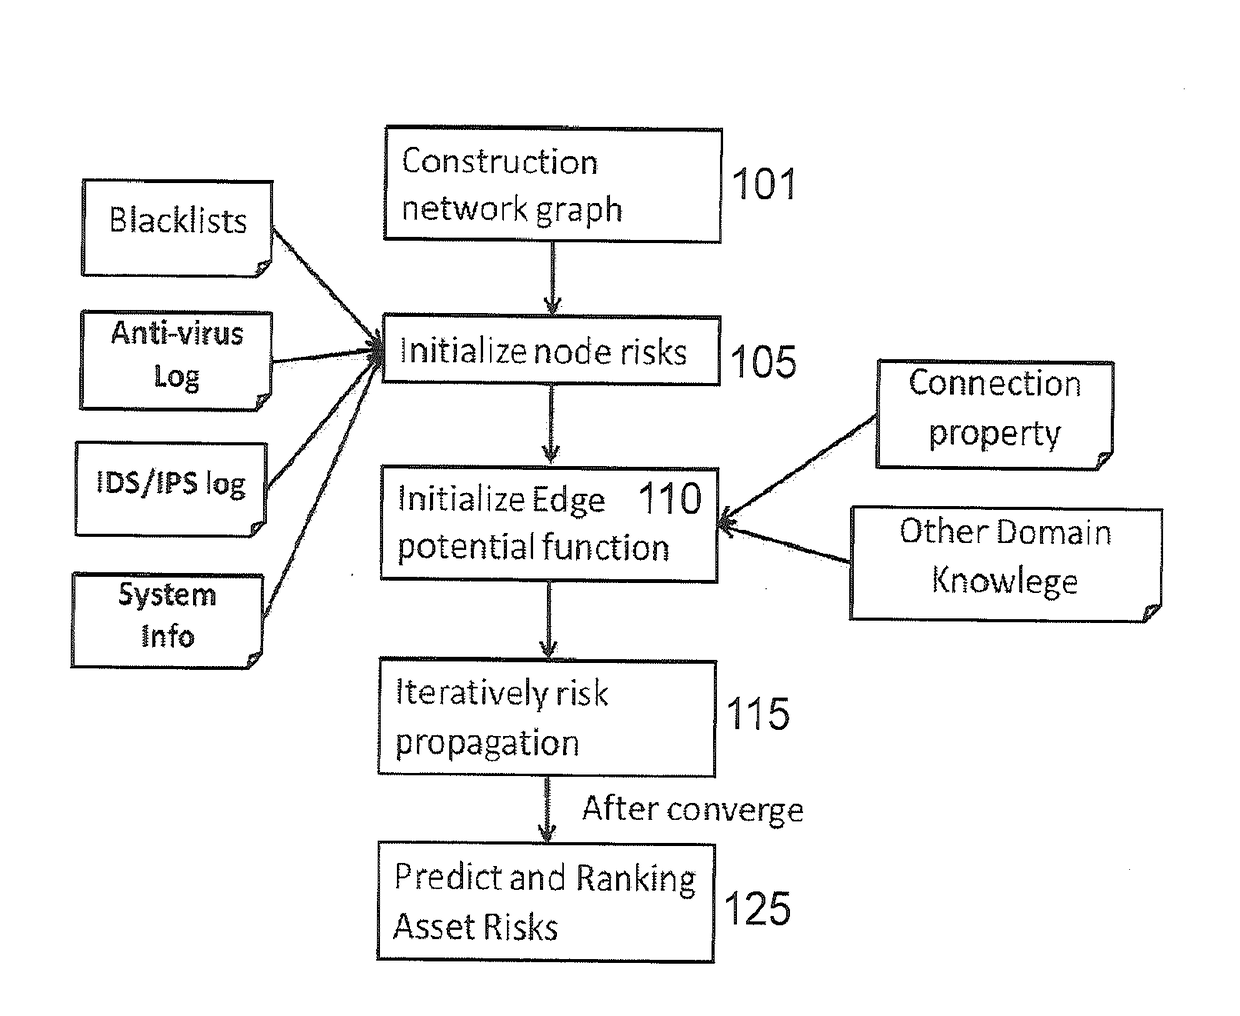 Cognitive scoring of asset risk based on predictive propagation of security-related events